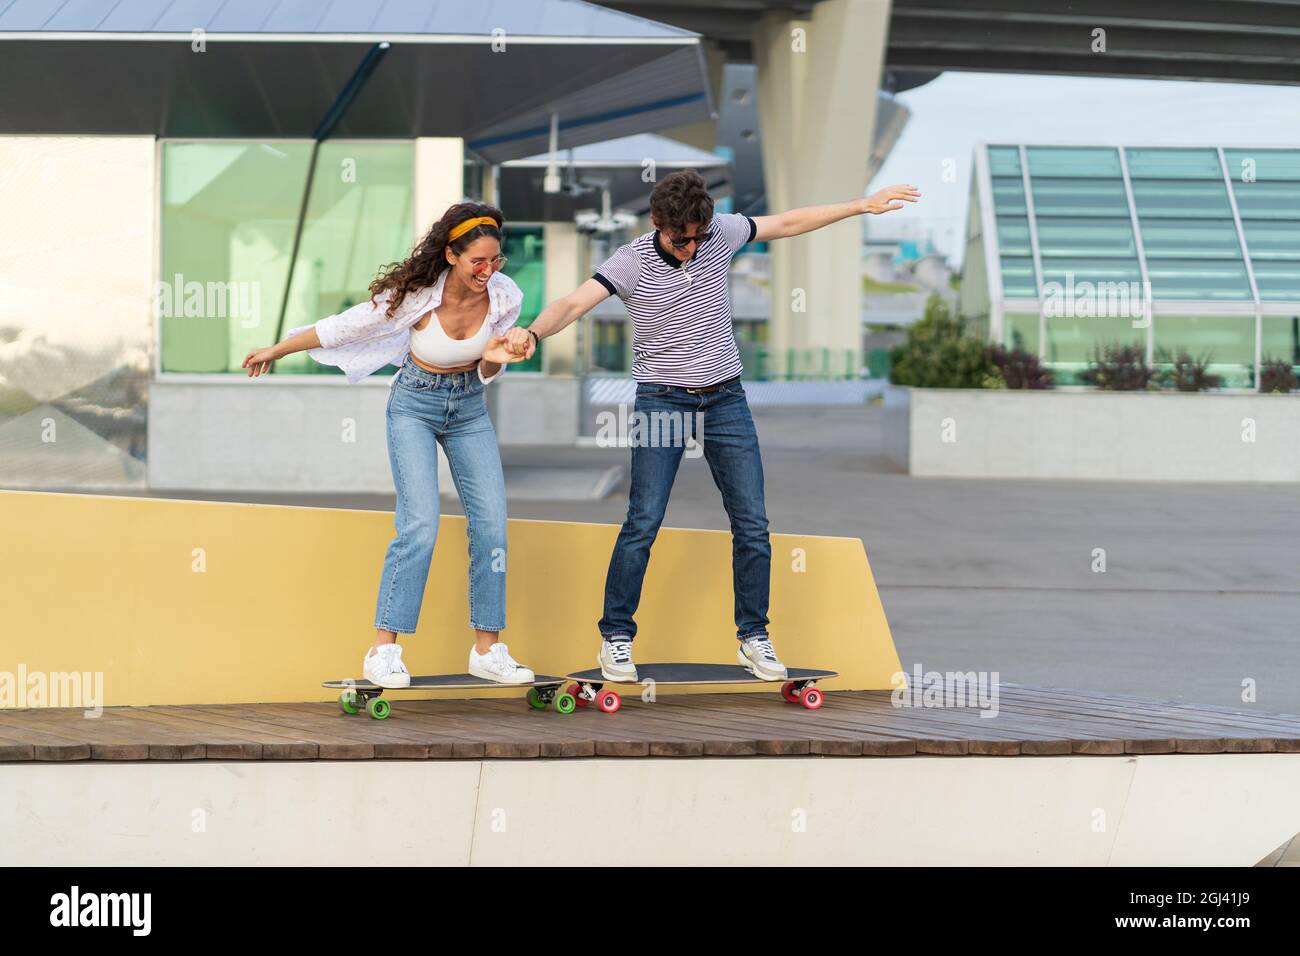 Active young skaters couple learn to ride longboard together hold hands laughing stand on skateboard Stock Photo